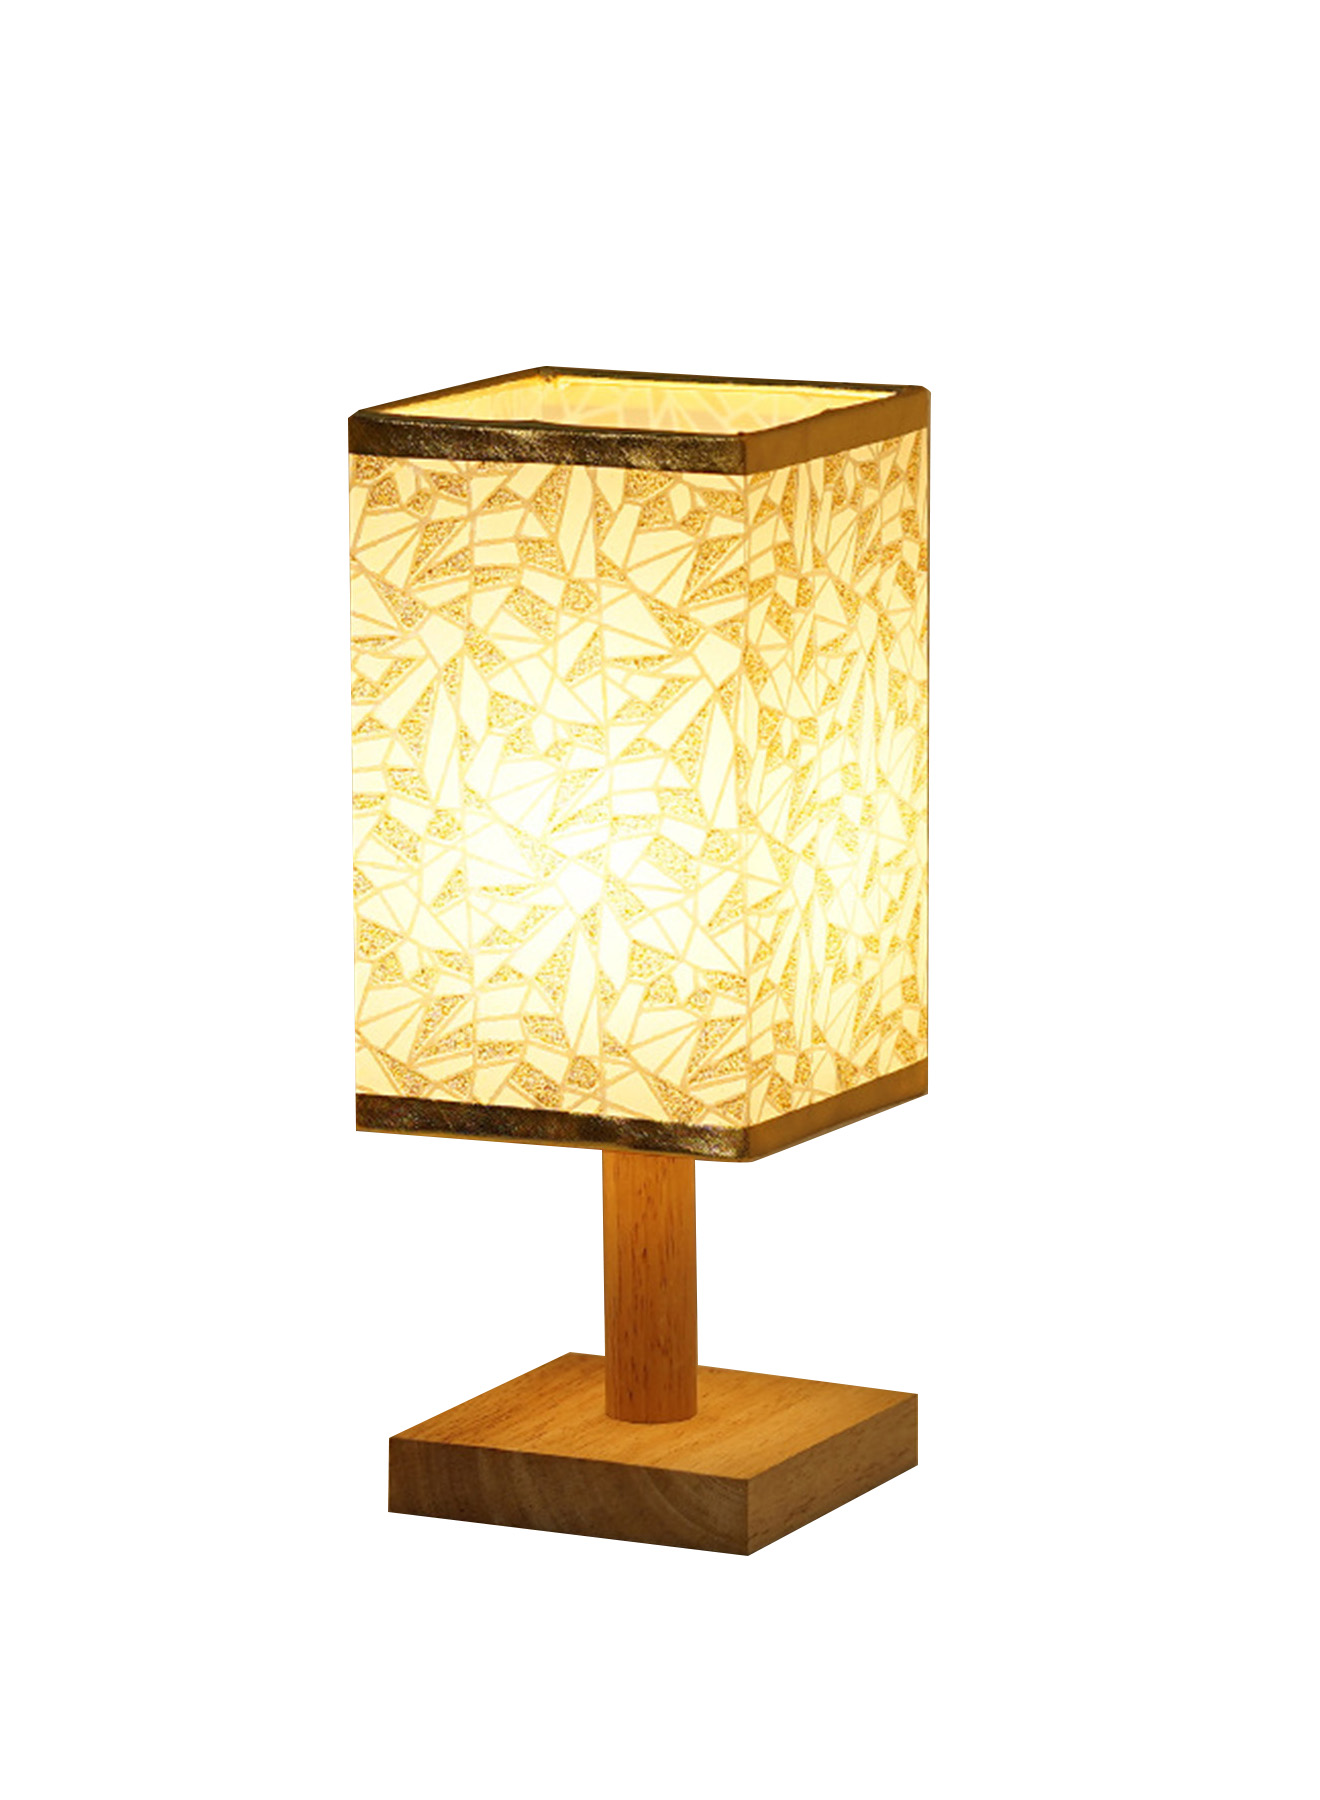 USB Infinitely Dimmable Warm Light Table Lamp, Bedside Atmosphere Light 3W